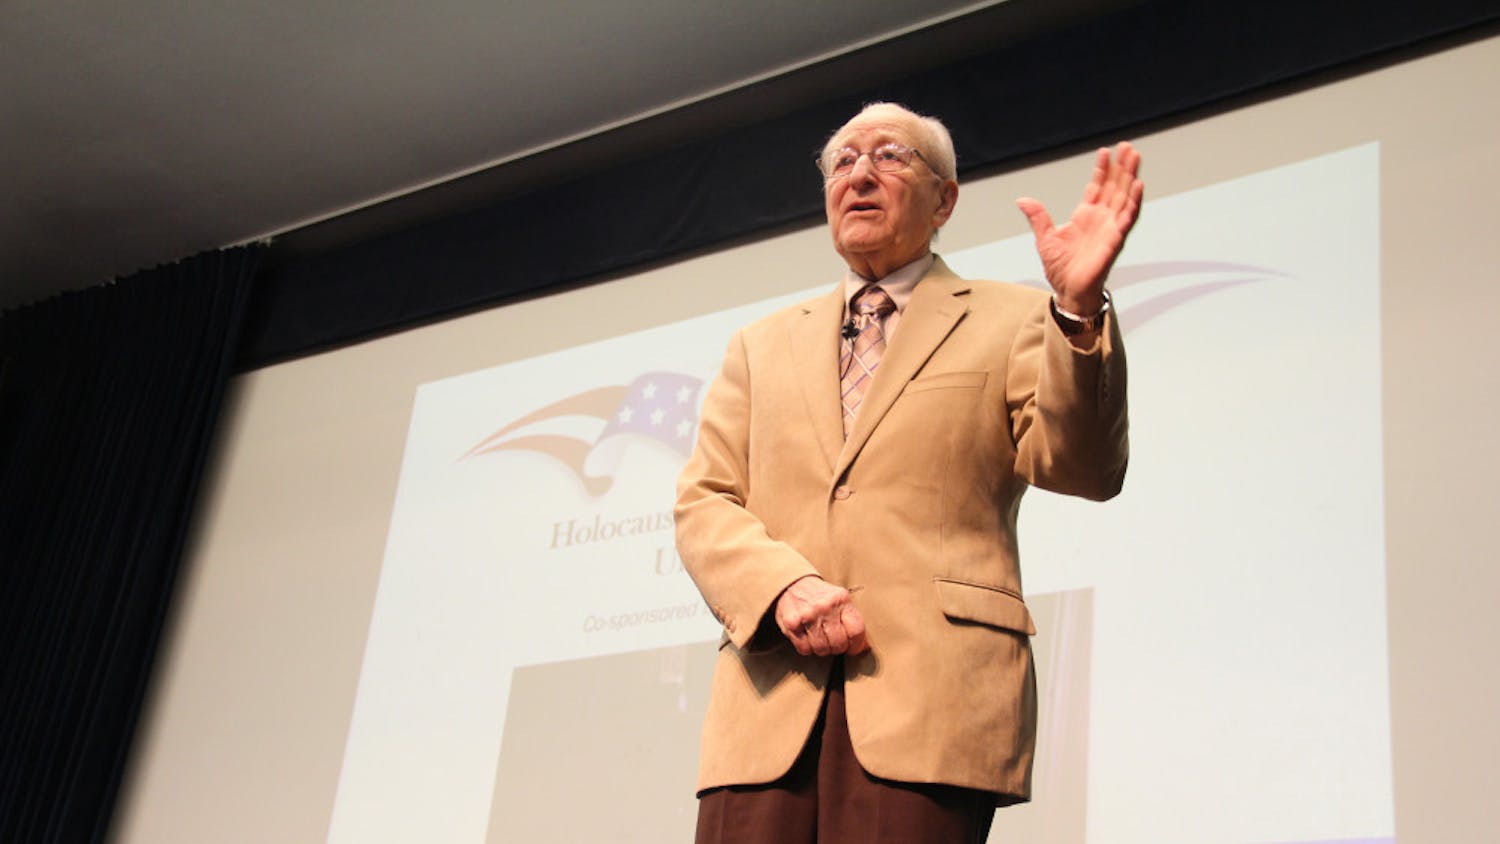 Holocaust survivor Irving Roth speaks to students about his experiences in Auschwitz. Roth spoke to about 500 students.